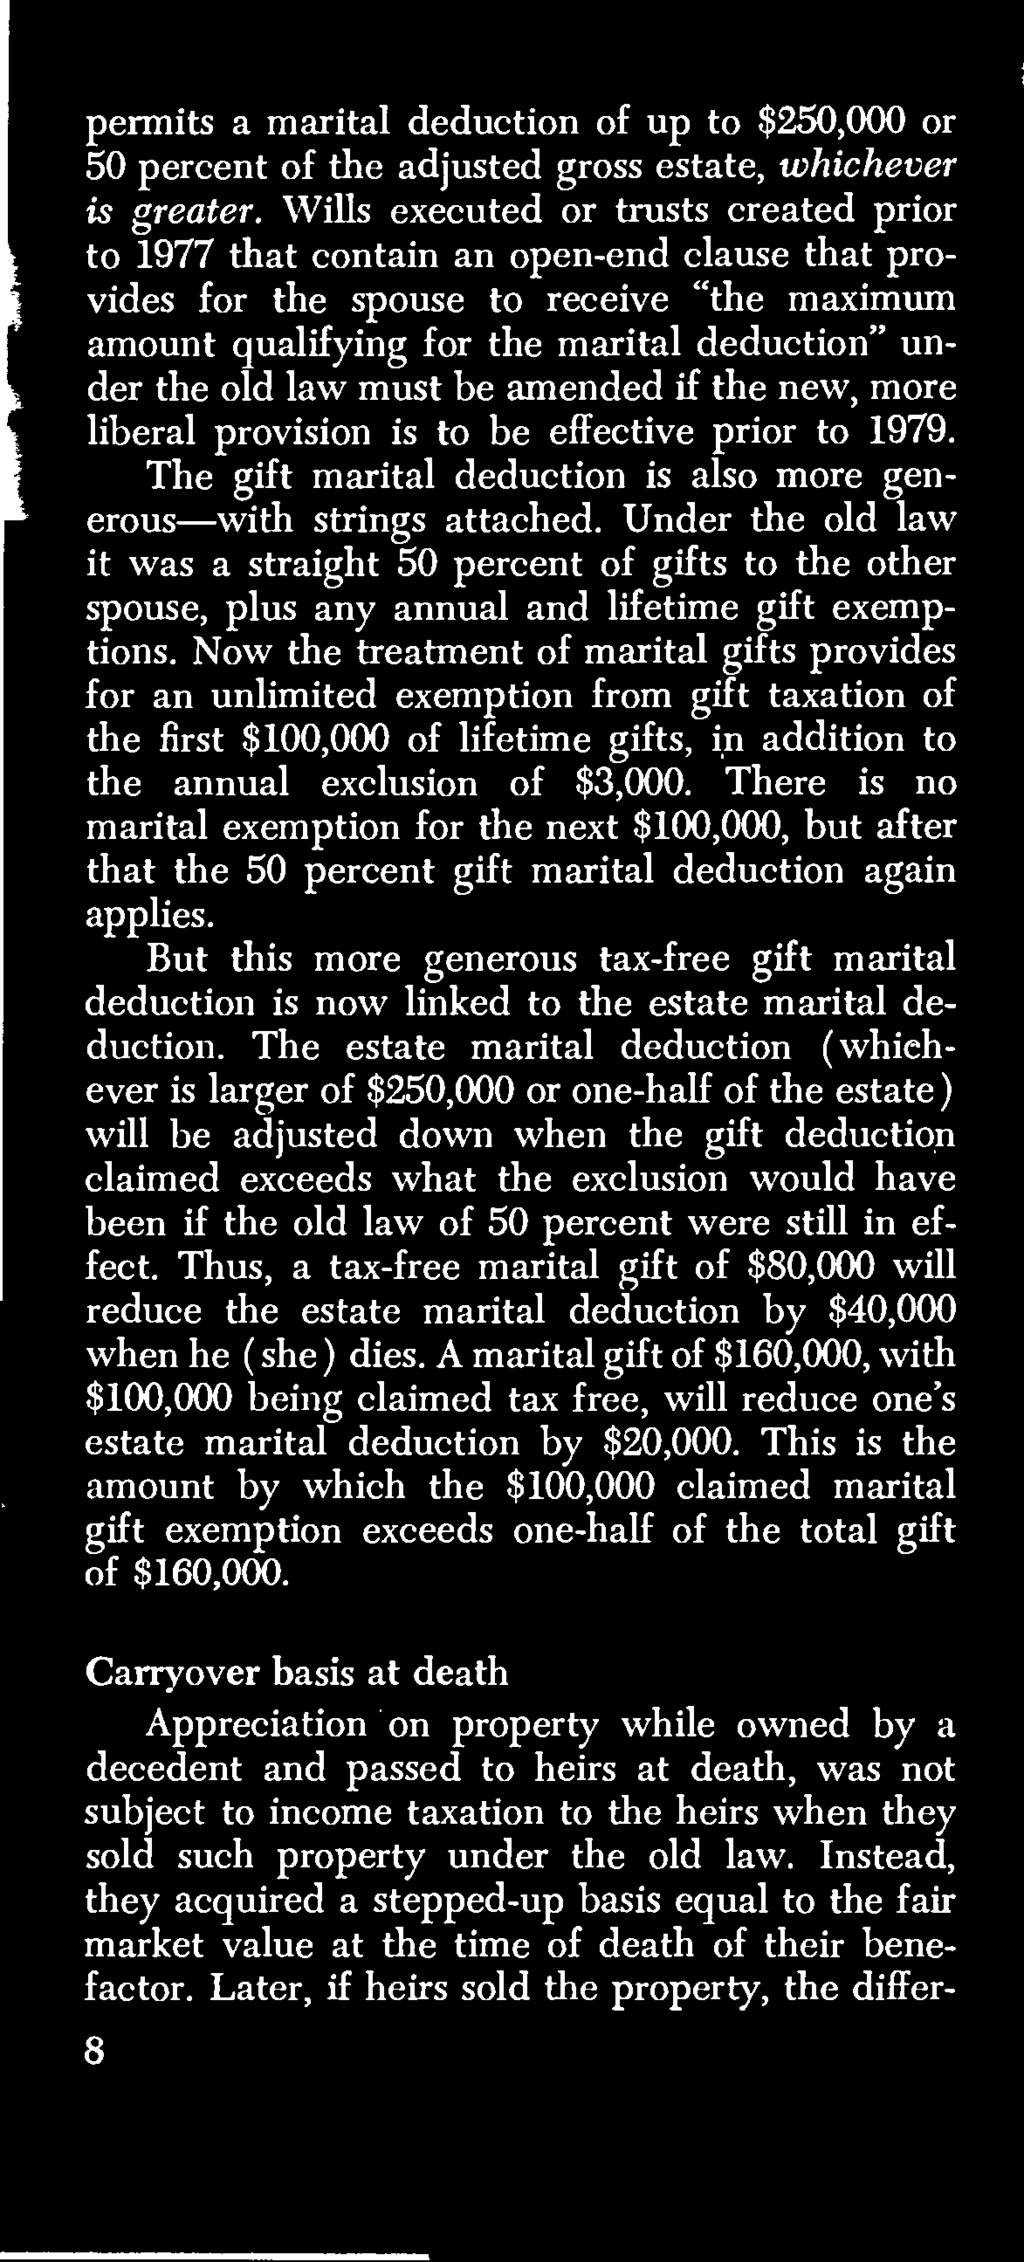 Now the treatment of marital gifts provides for an unlimited exemption from gift taxation of the first $100,000 of lifetime gifts, in addition to the annual exclusion of $3,000.